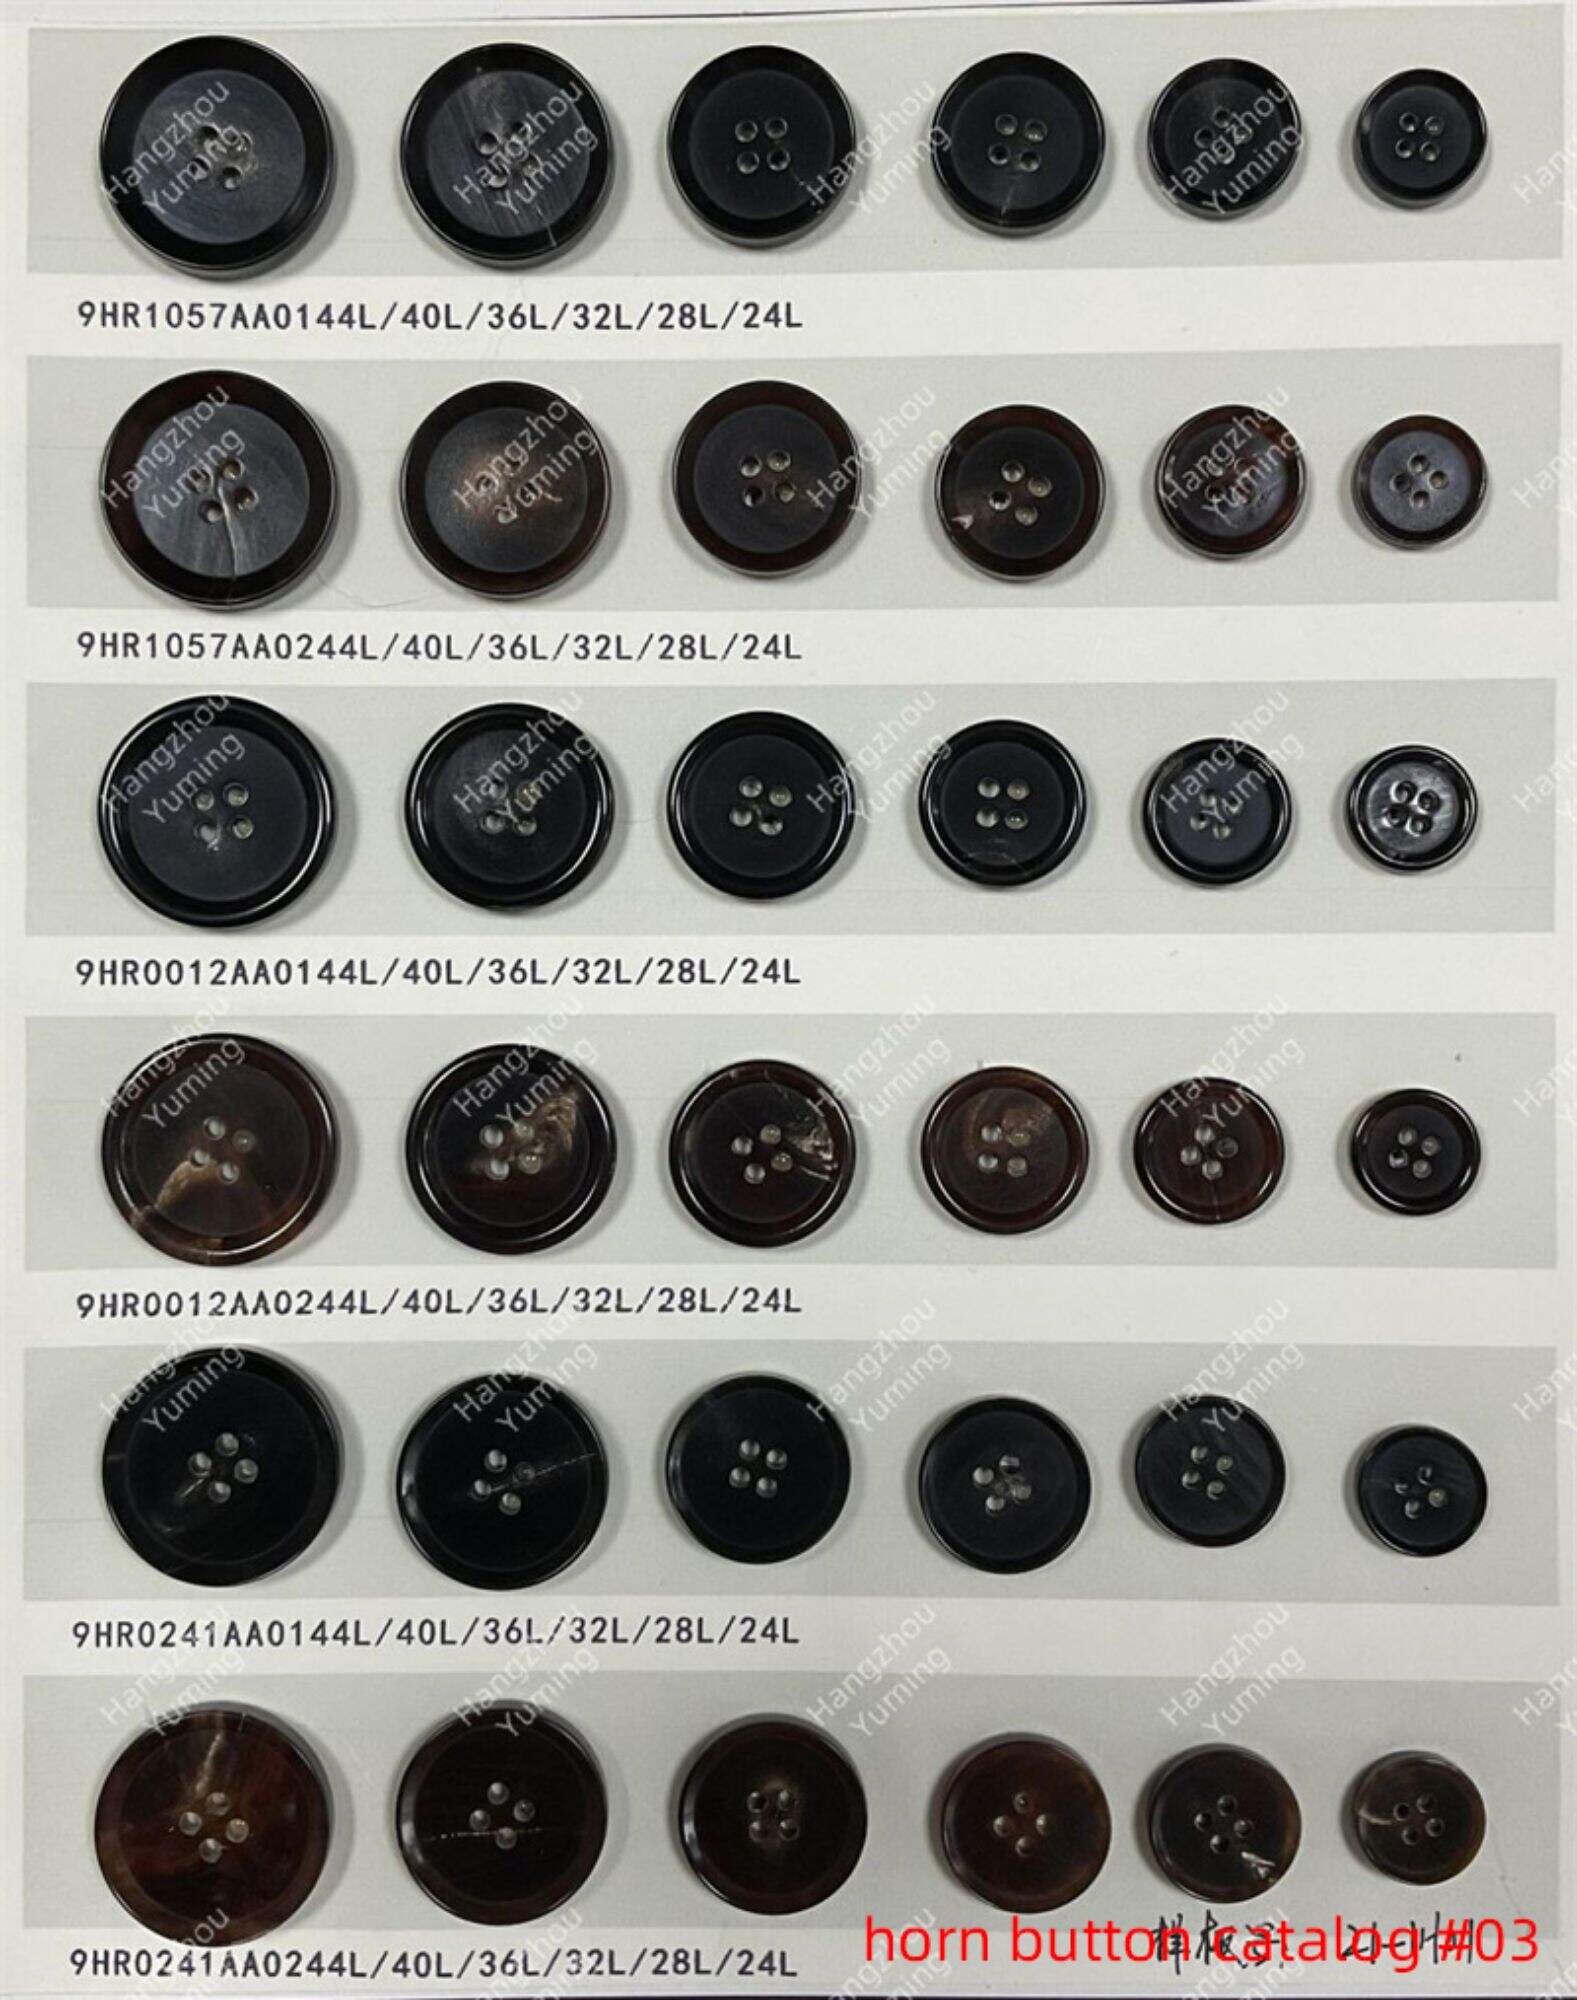 Real horn button catalogs